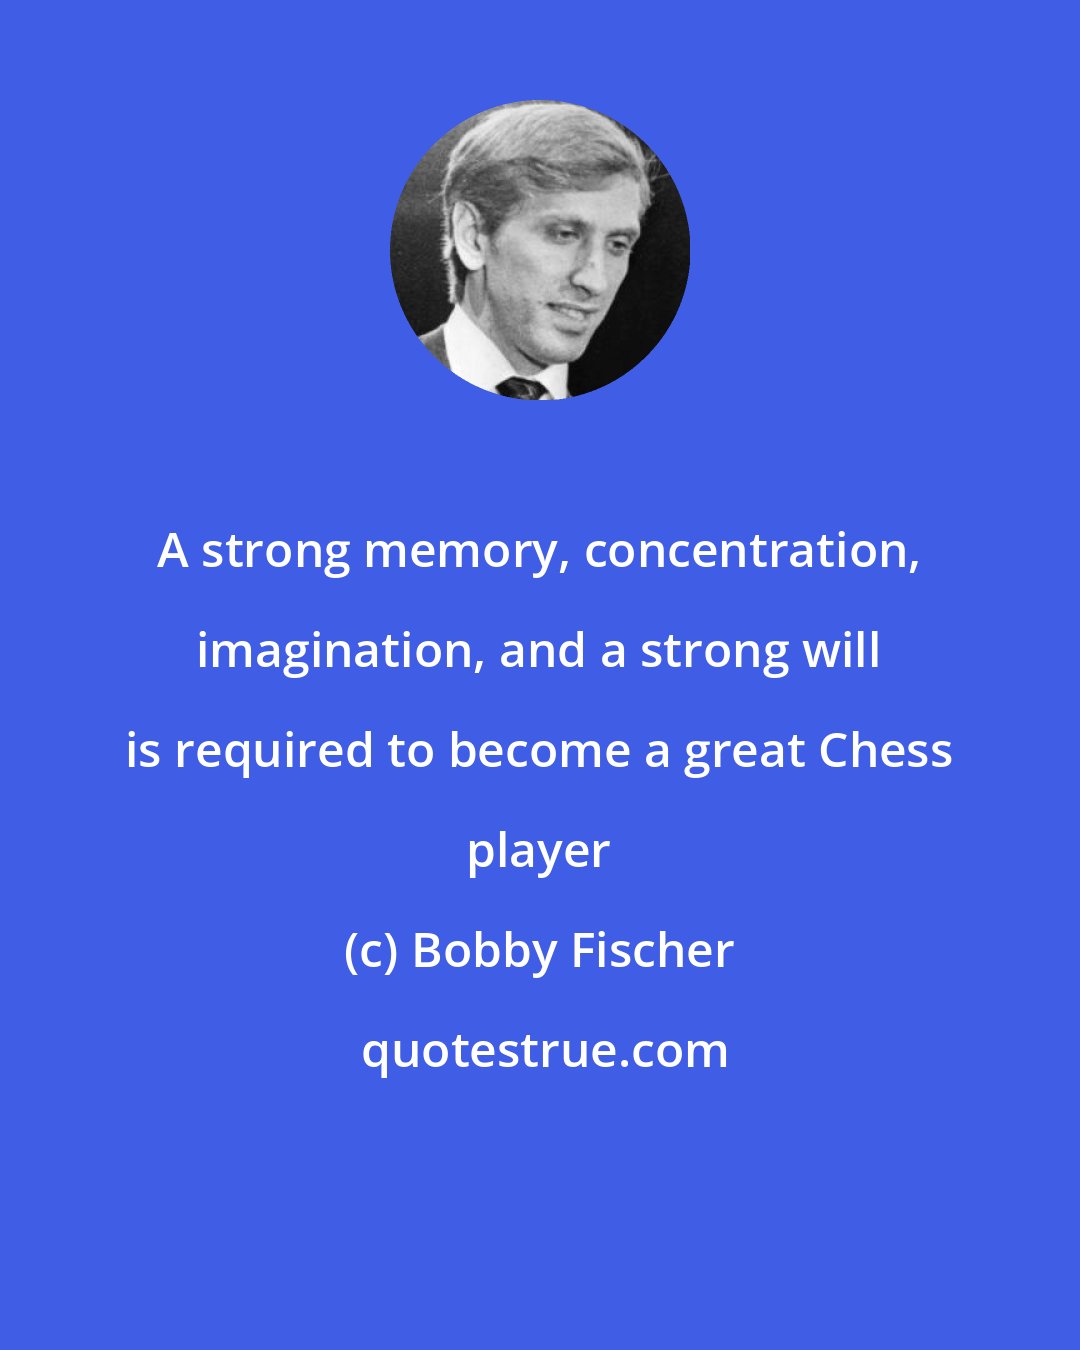 Bobby Fischer: A strong memory, concentration, imagination, and a strong will is required to become a great Chess player